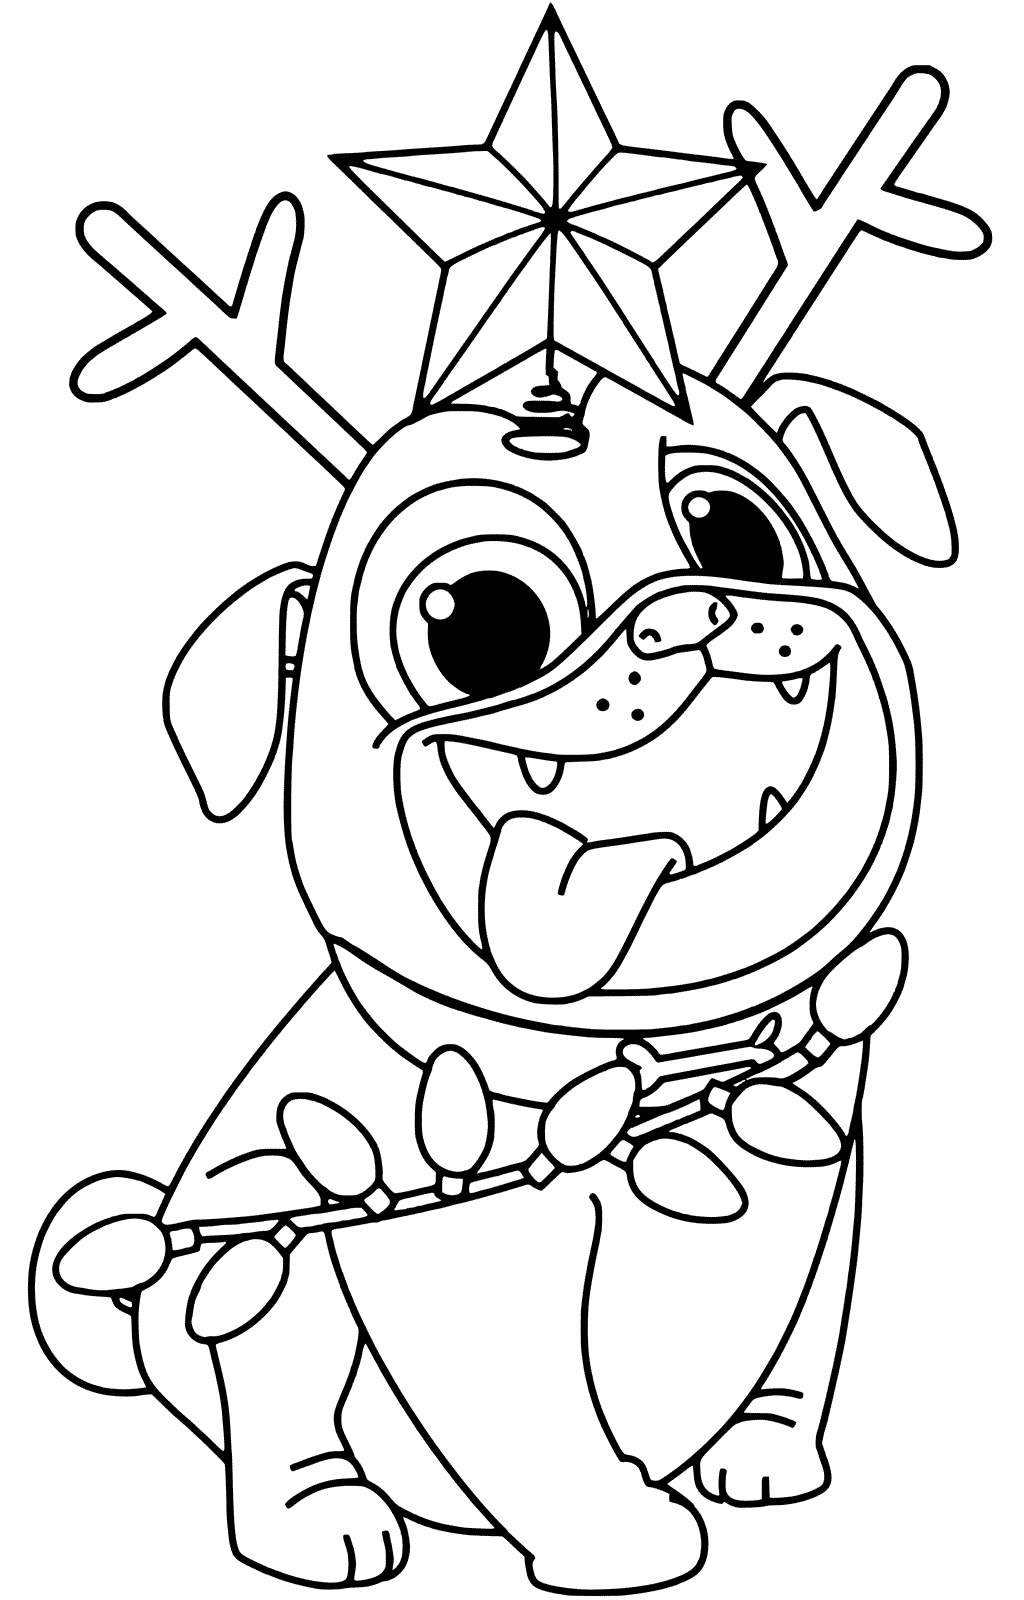 Dog Coloring Pages – coloring.rocks!